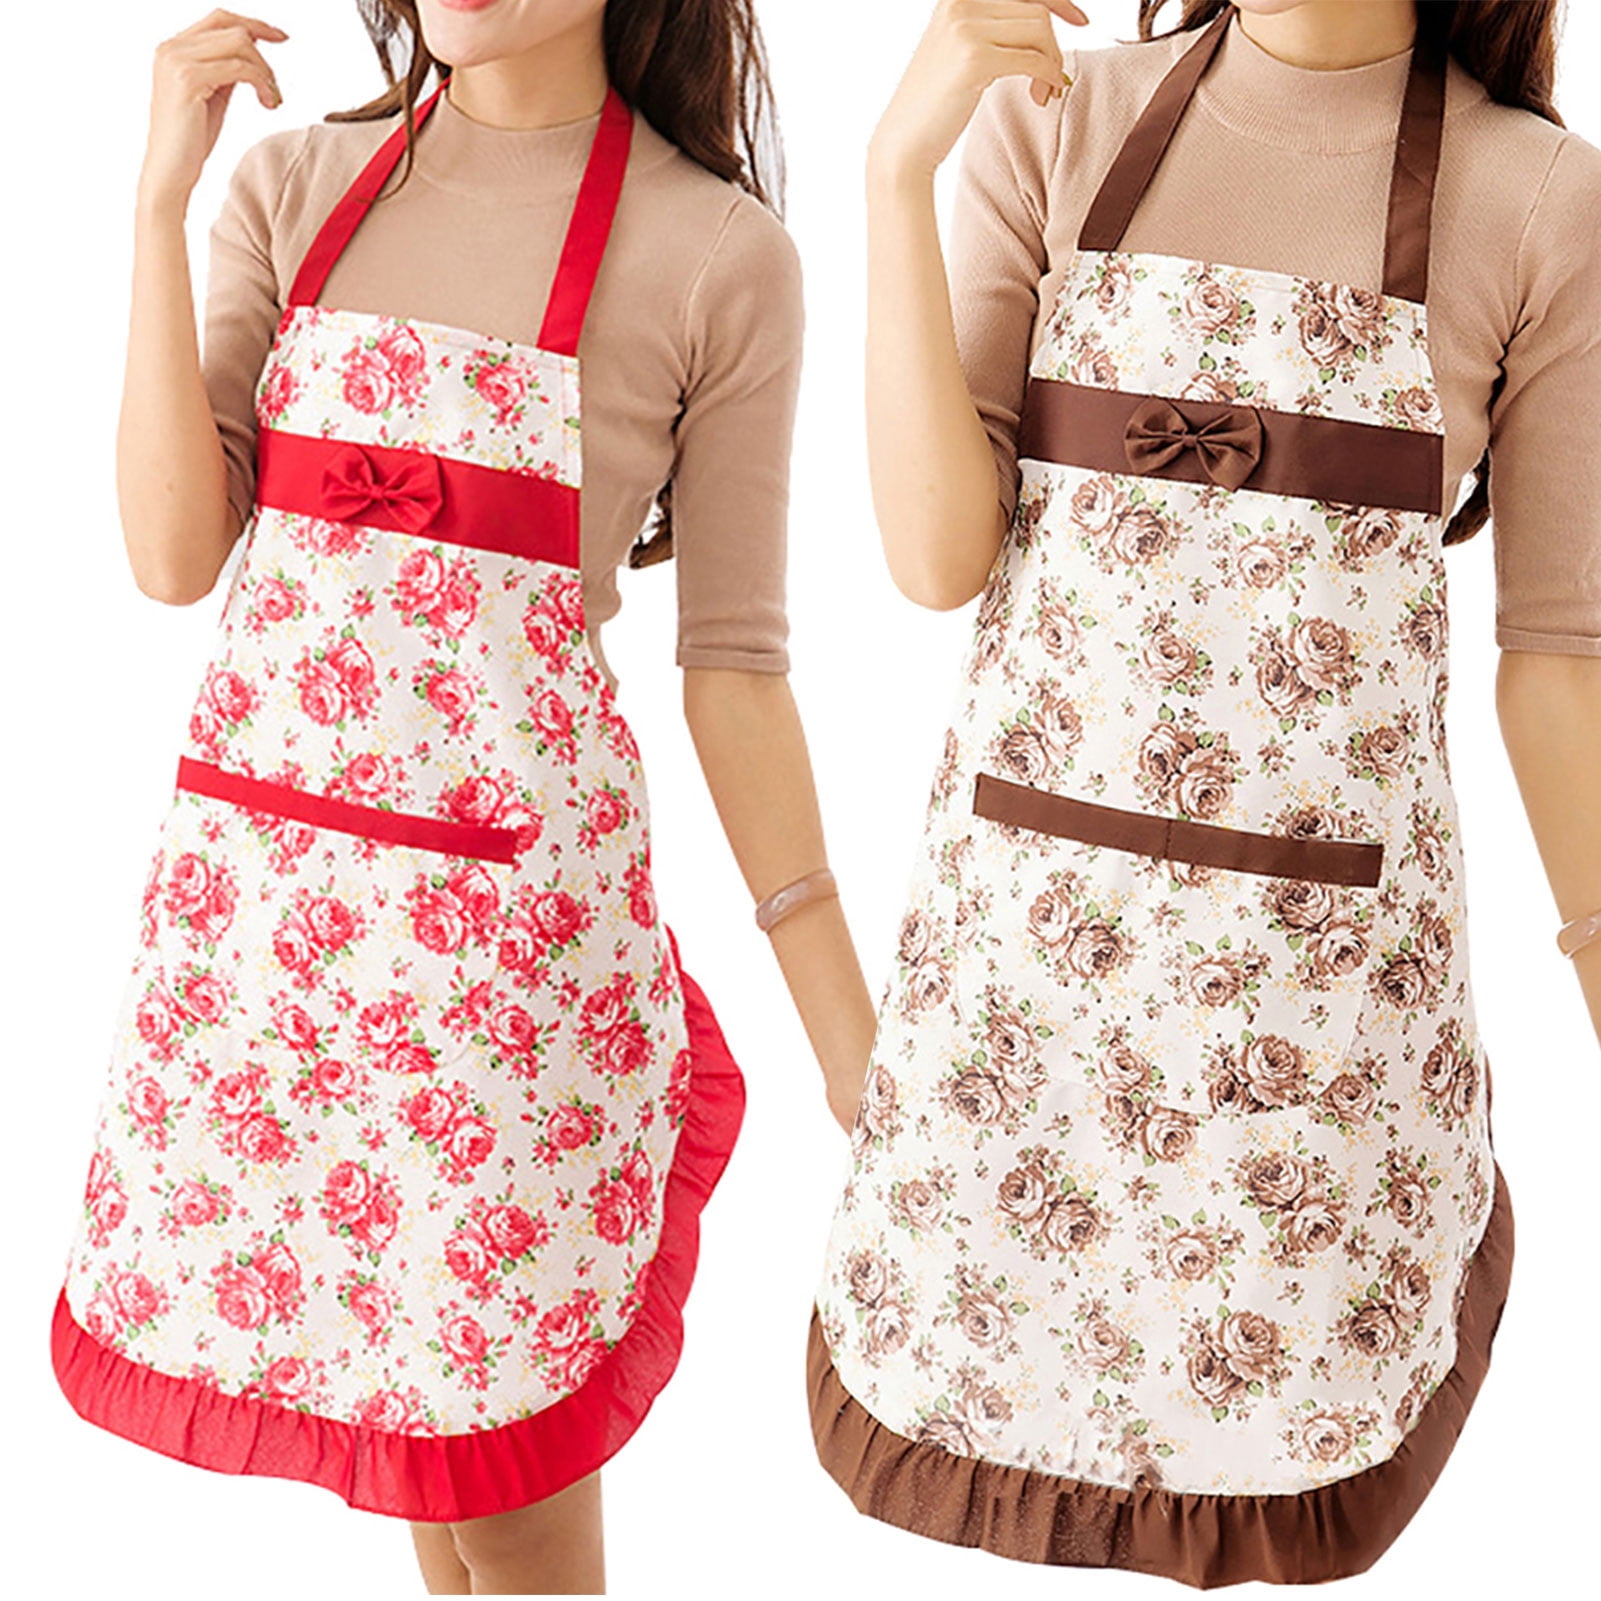 Pretty Apron Gift Set Mother & Daughter 100% Cotton Details about   Adorable Adult & Child 